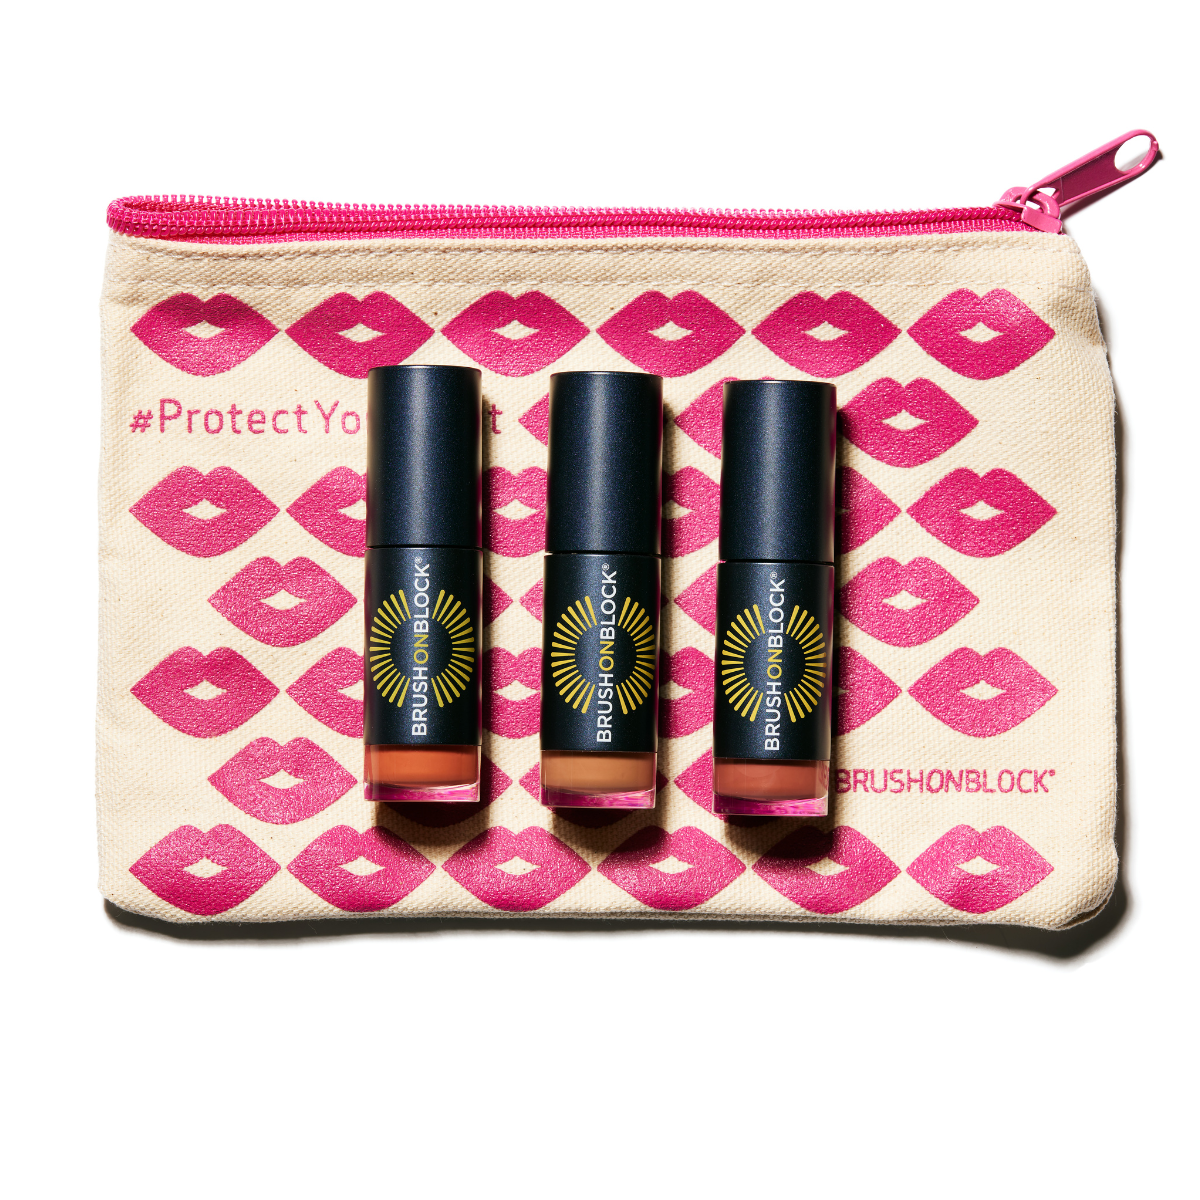 Protect Your Pout Bag